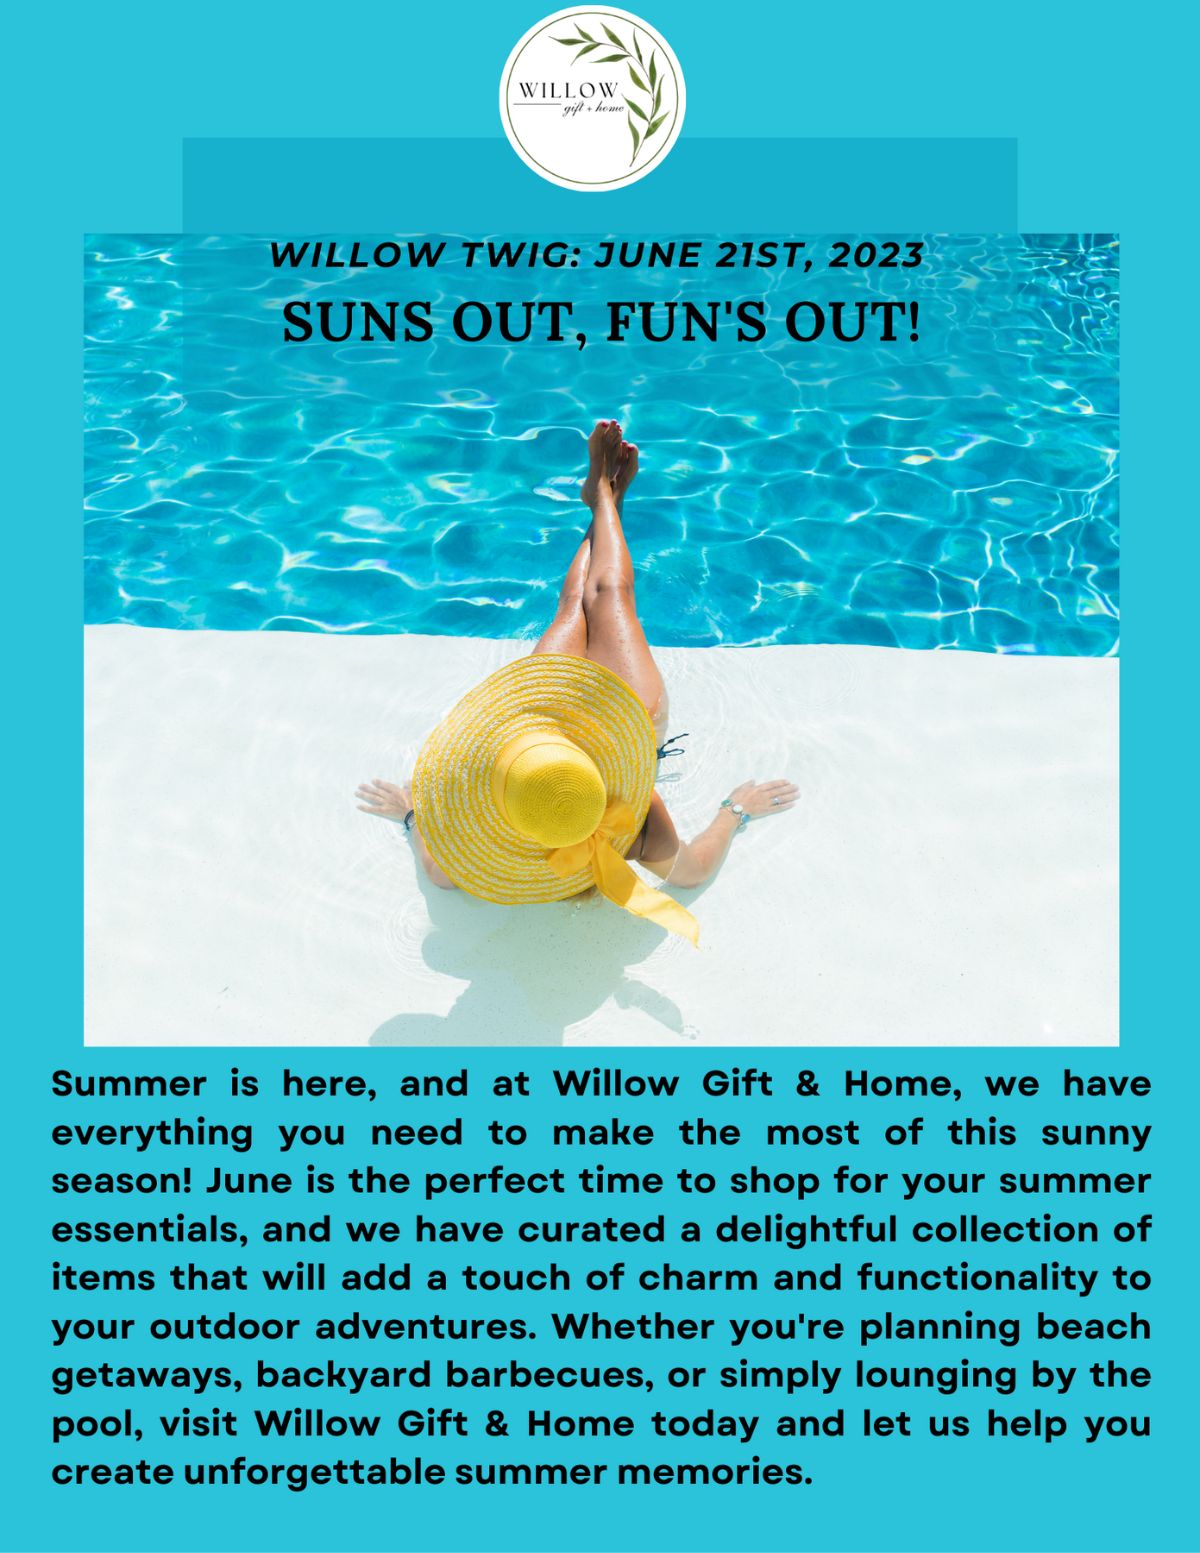 Summer Fun at Willow Gift & Home